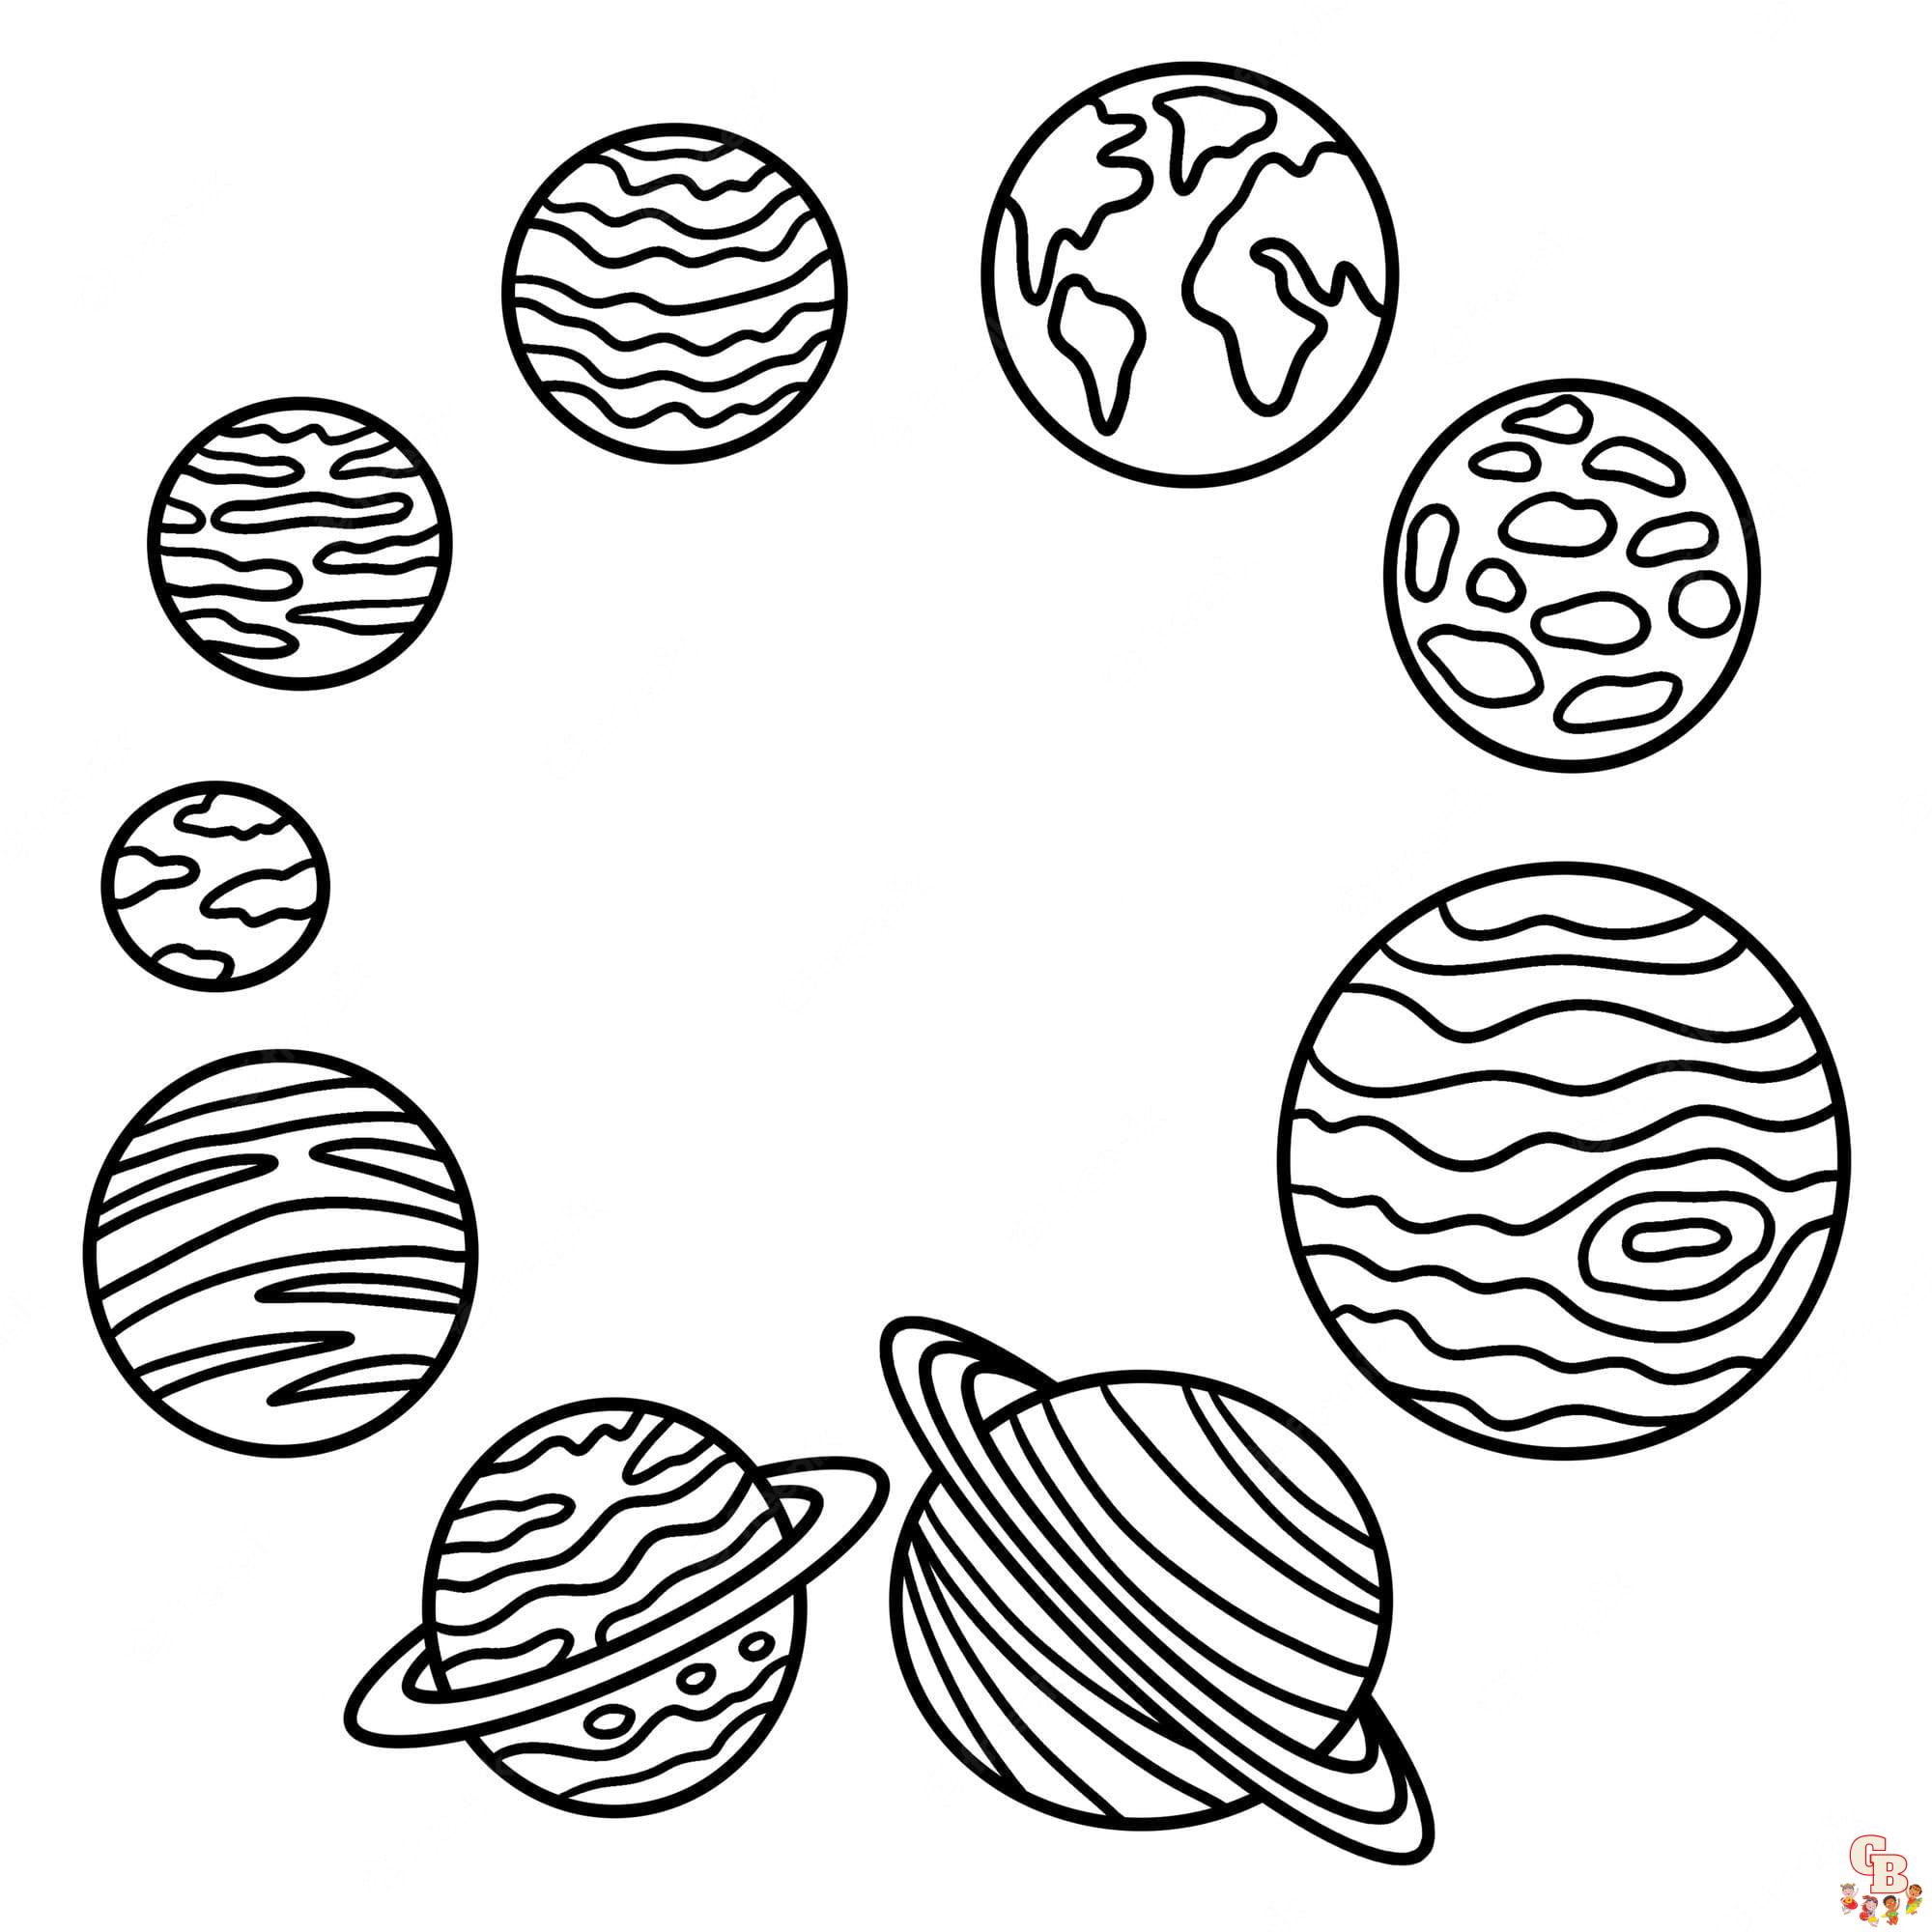 Planet coloring pages